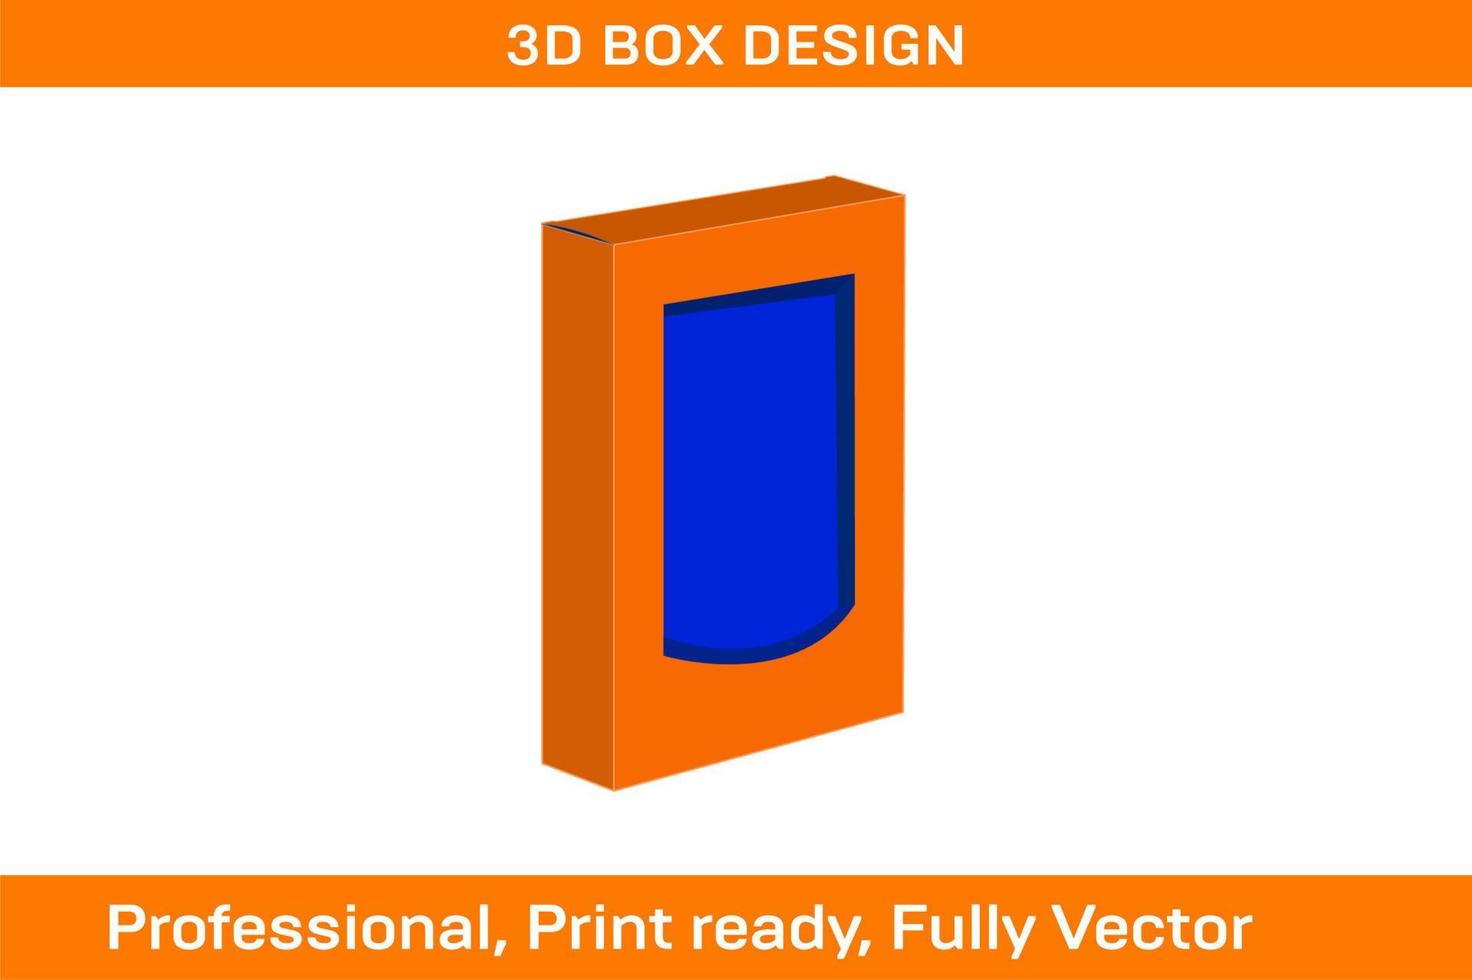 Tuck End box with transparent window box Dieline template and 3D box vector